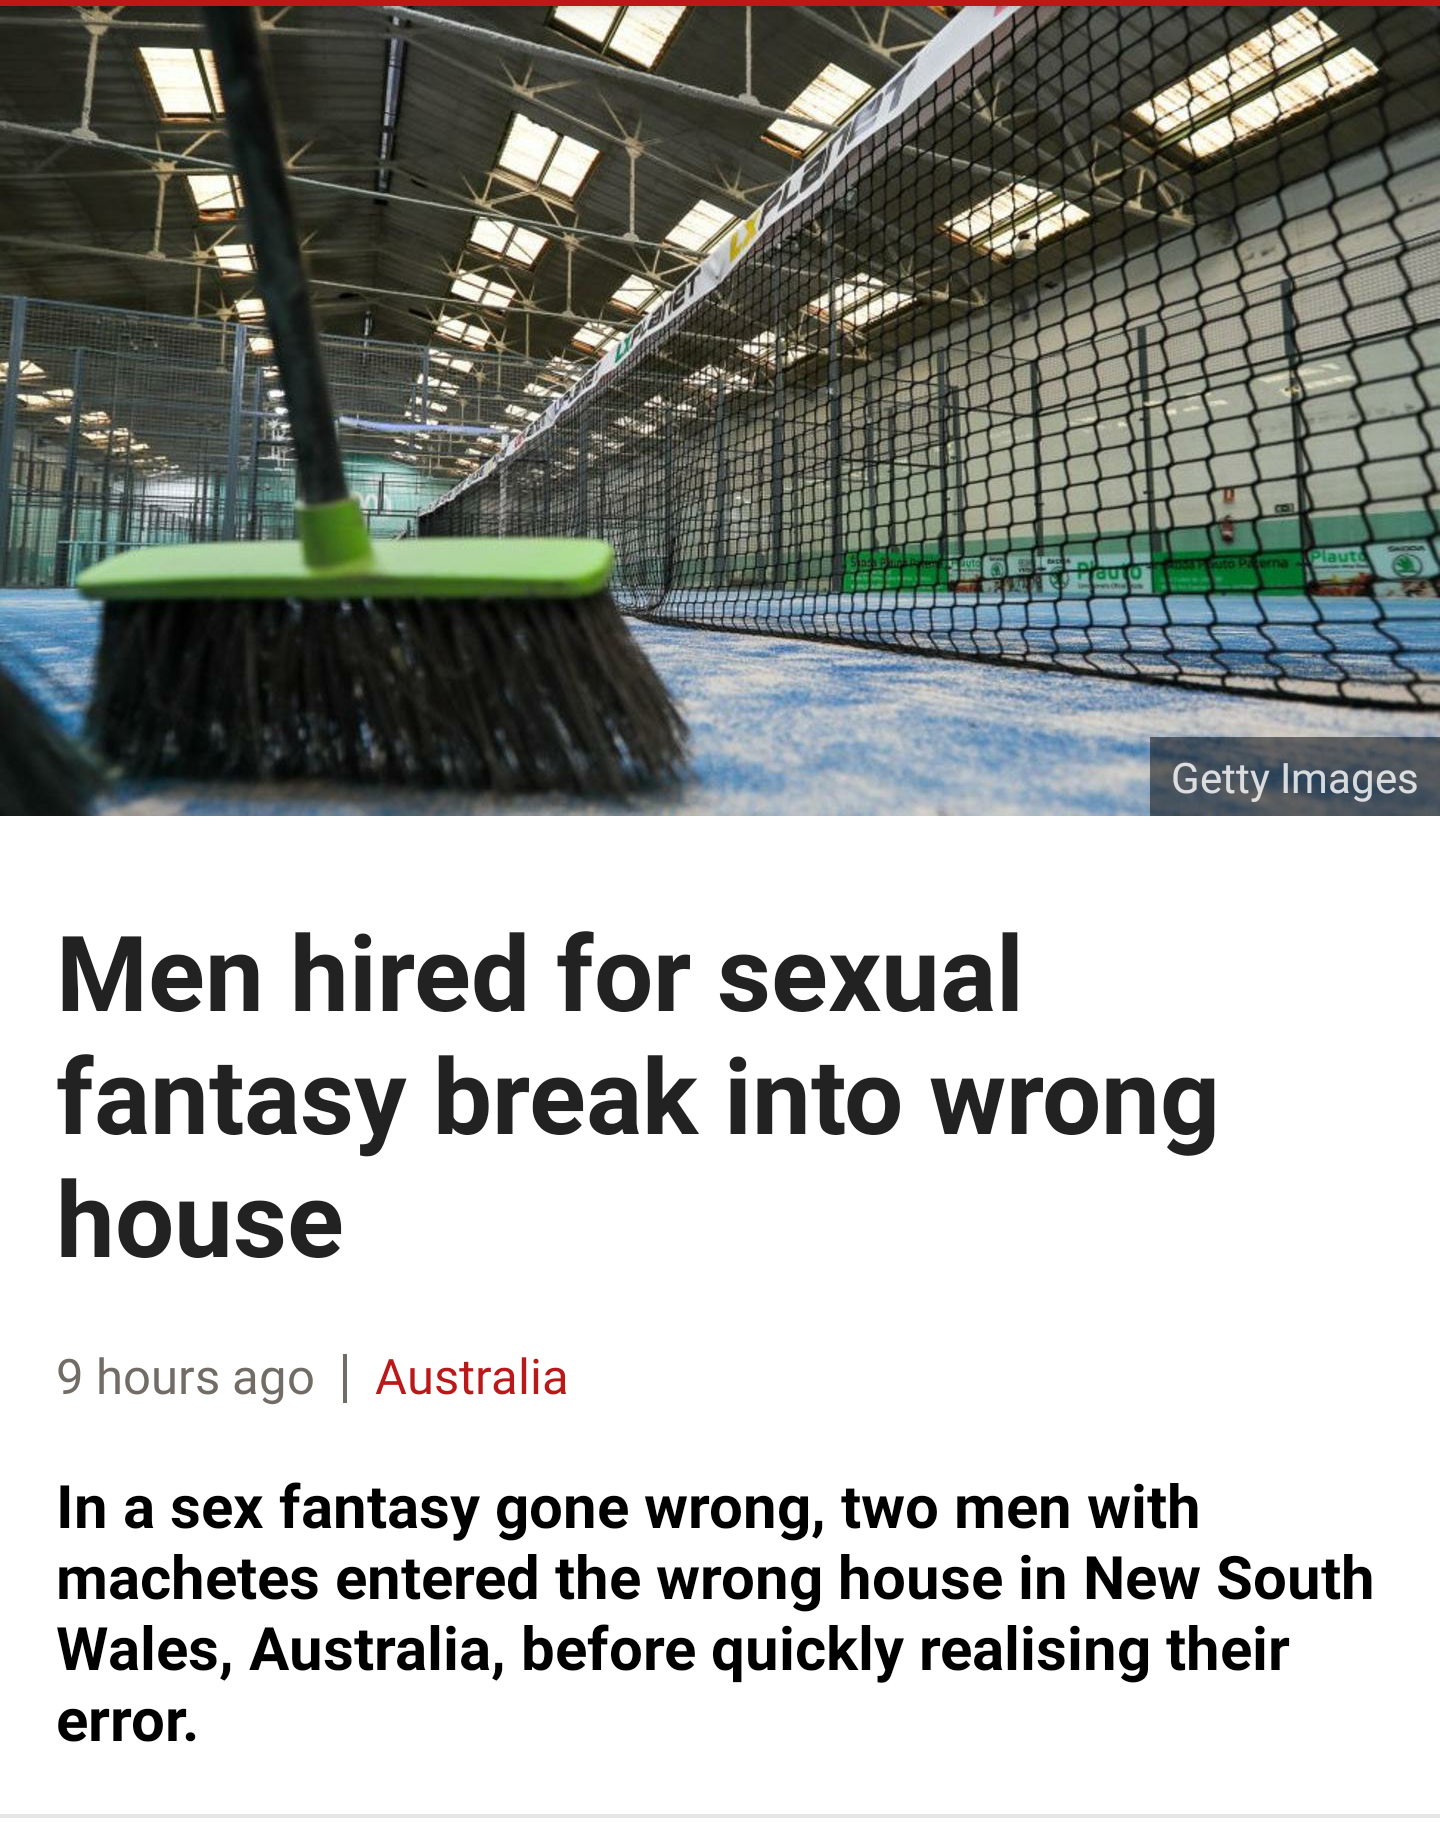 Sexual fantasy - Getty Images Men hired for sexual fantasy break into wrong house 9 hours ago Australia In a sex fantasy gone wrong, two men with machetes entered the wrong house in New South Wales, Australia, before quickly realising their error.